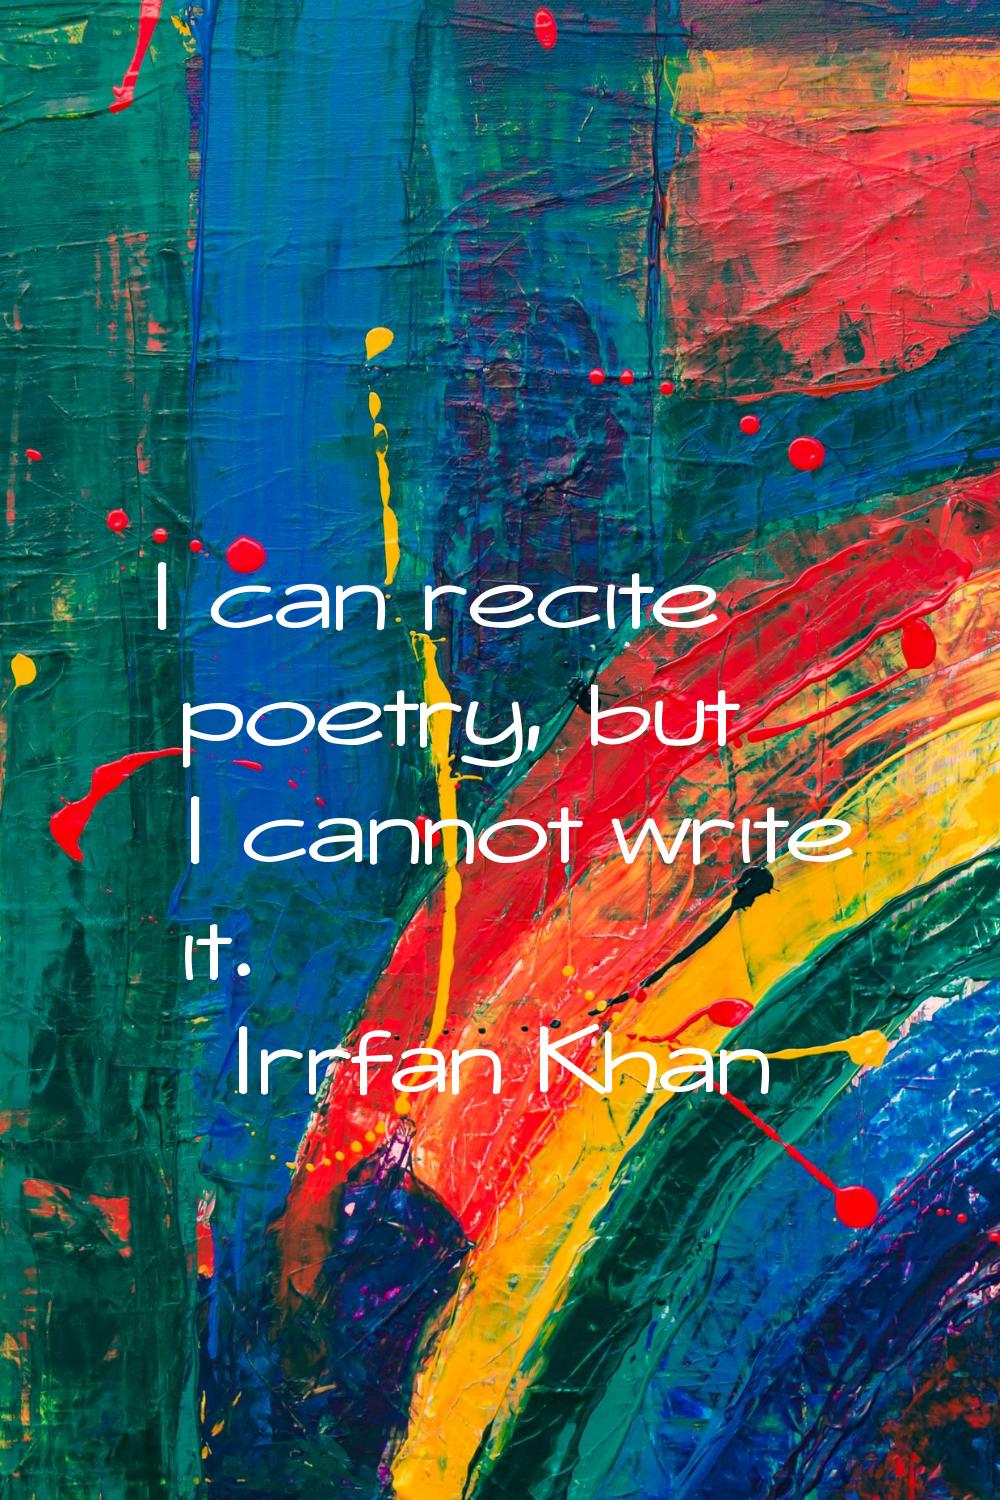 I can recite poetry, but I cannot write it.